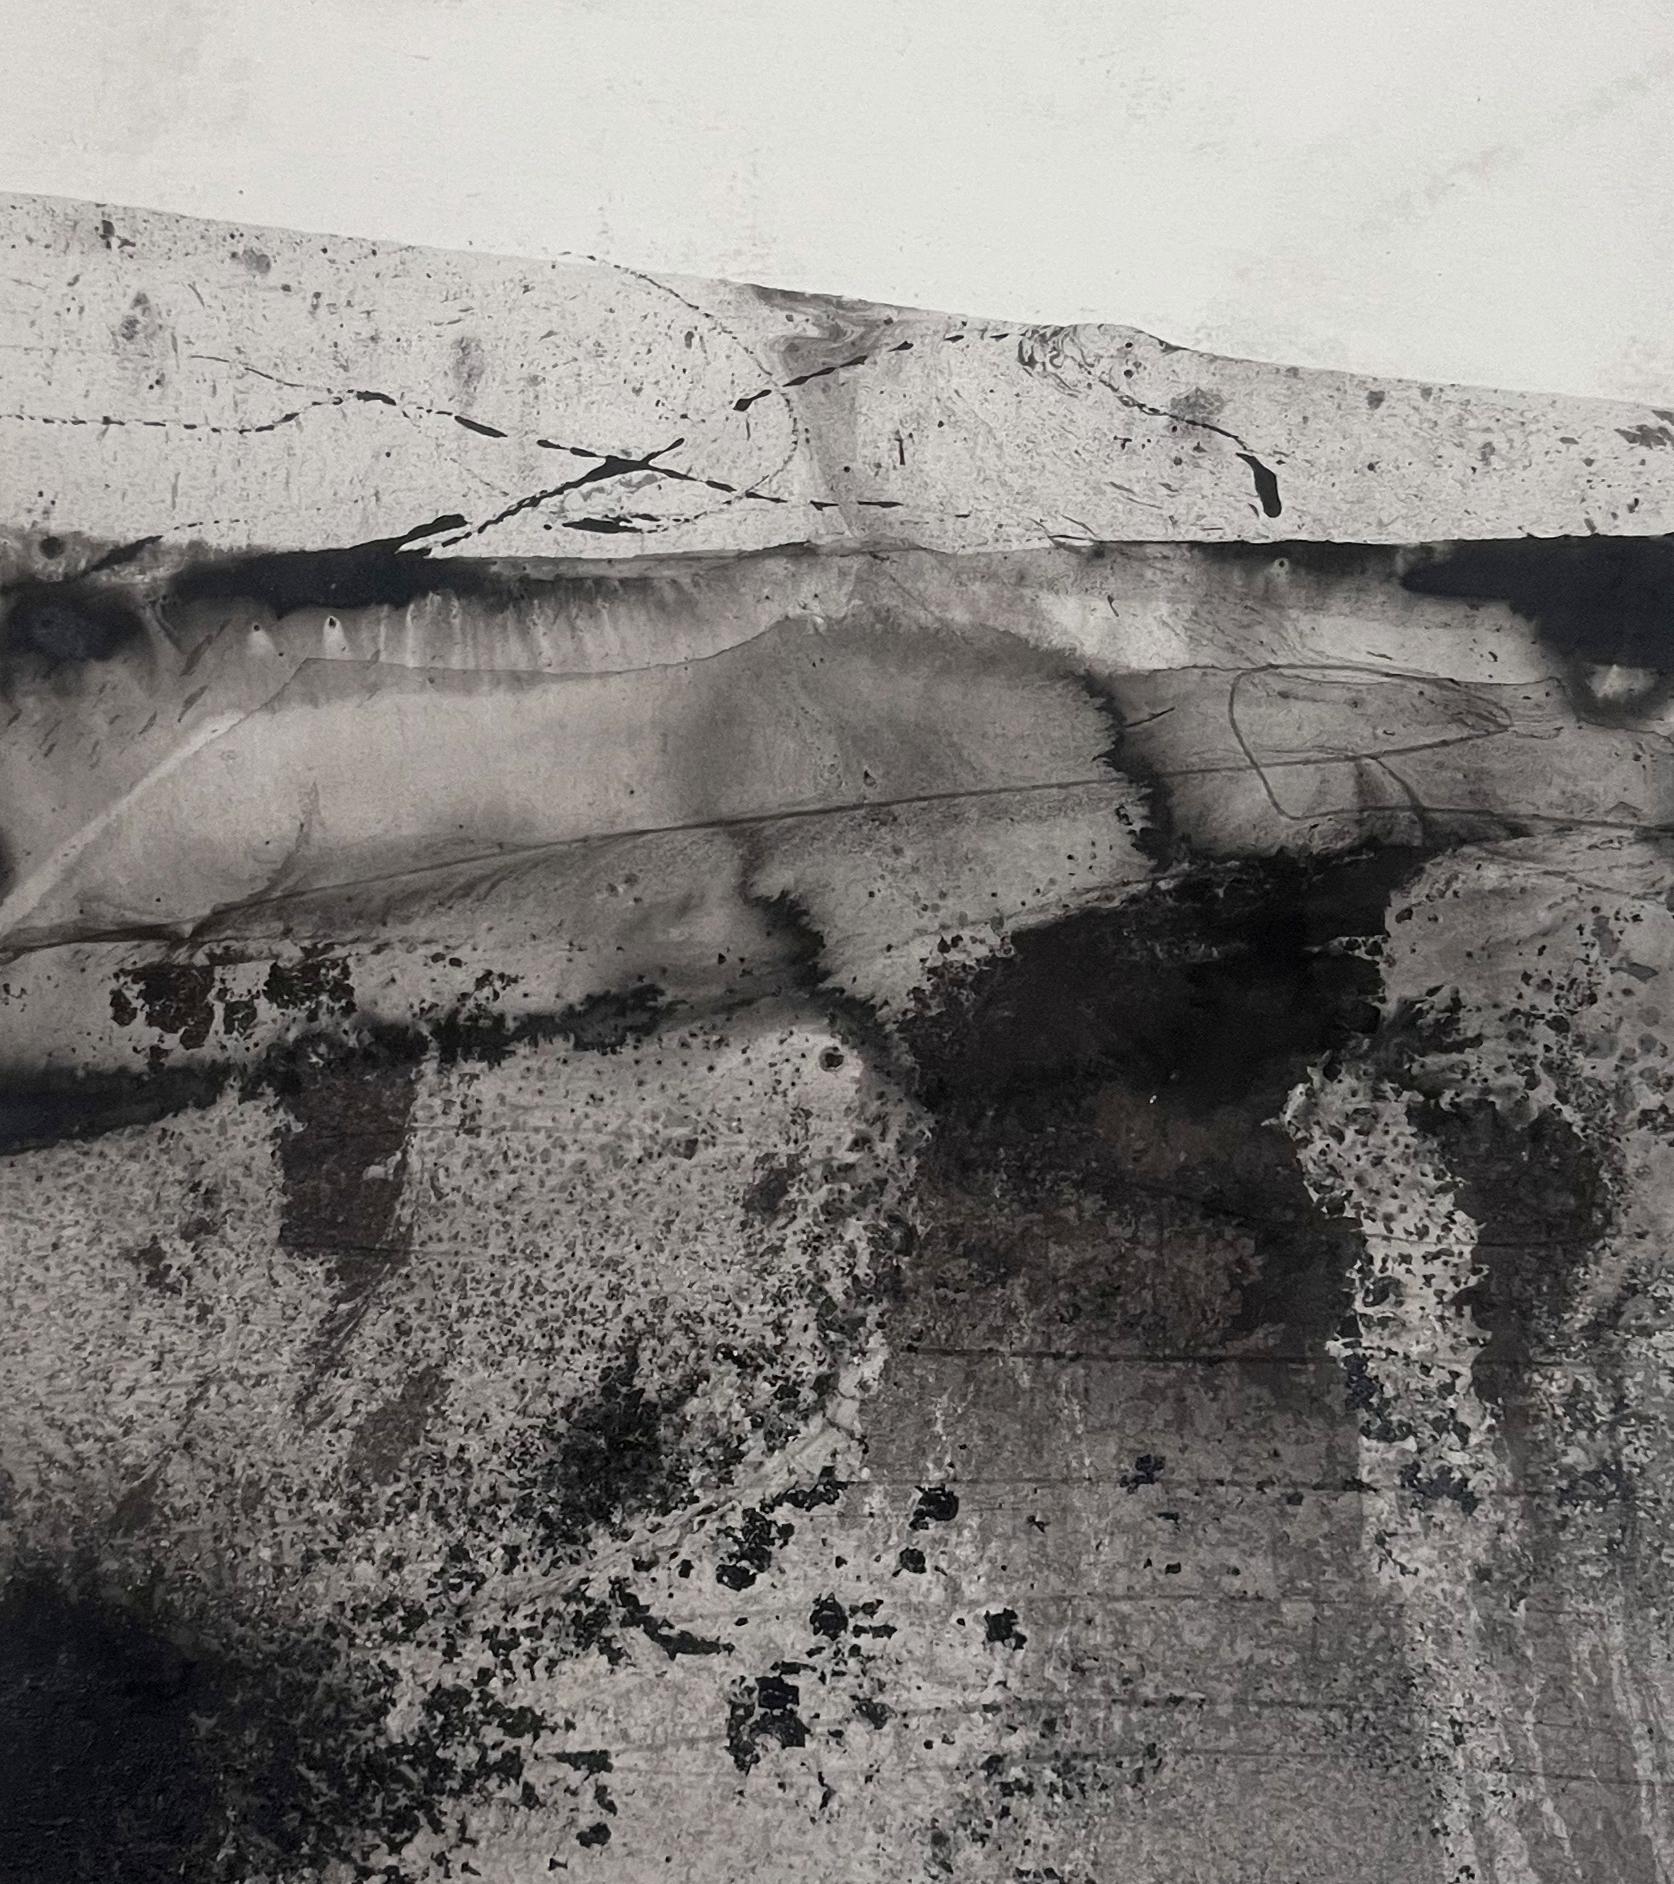 Landscape BW
charcoal on paper (Canson Paper 300gr)
30x40 cm
the Drawing is mounted on a rigid support with passepartout
dimensions 40x50 cm
Ready to Hang
Certificate of Authenticity
one of a kind



Marilina Marchica, born in 1984, was born in